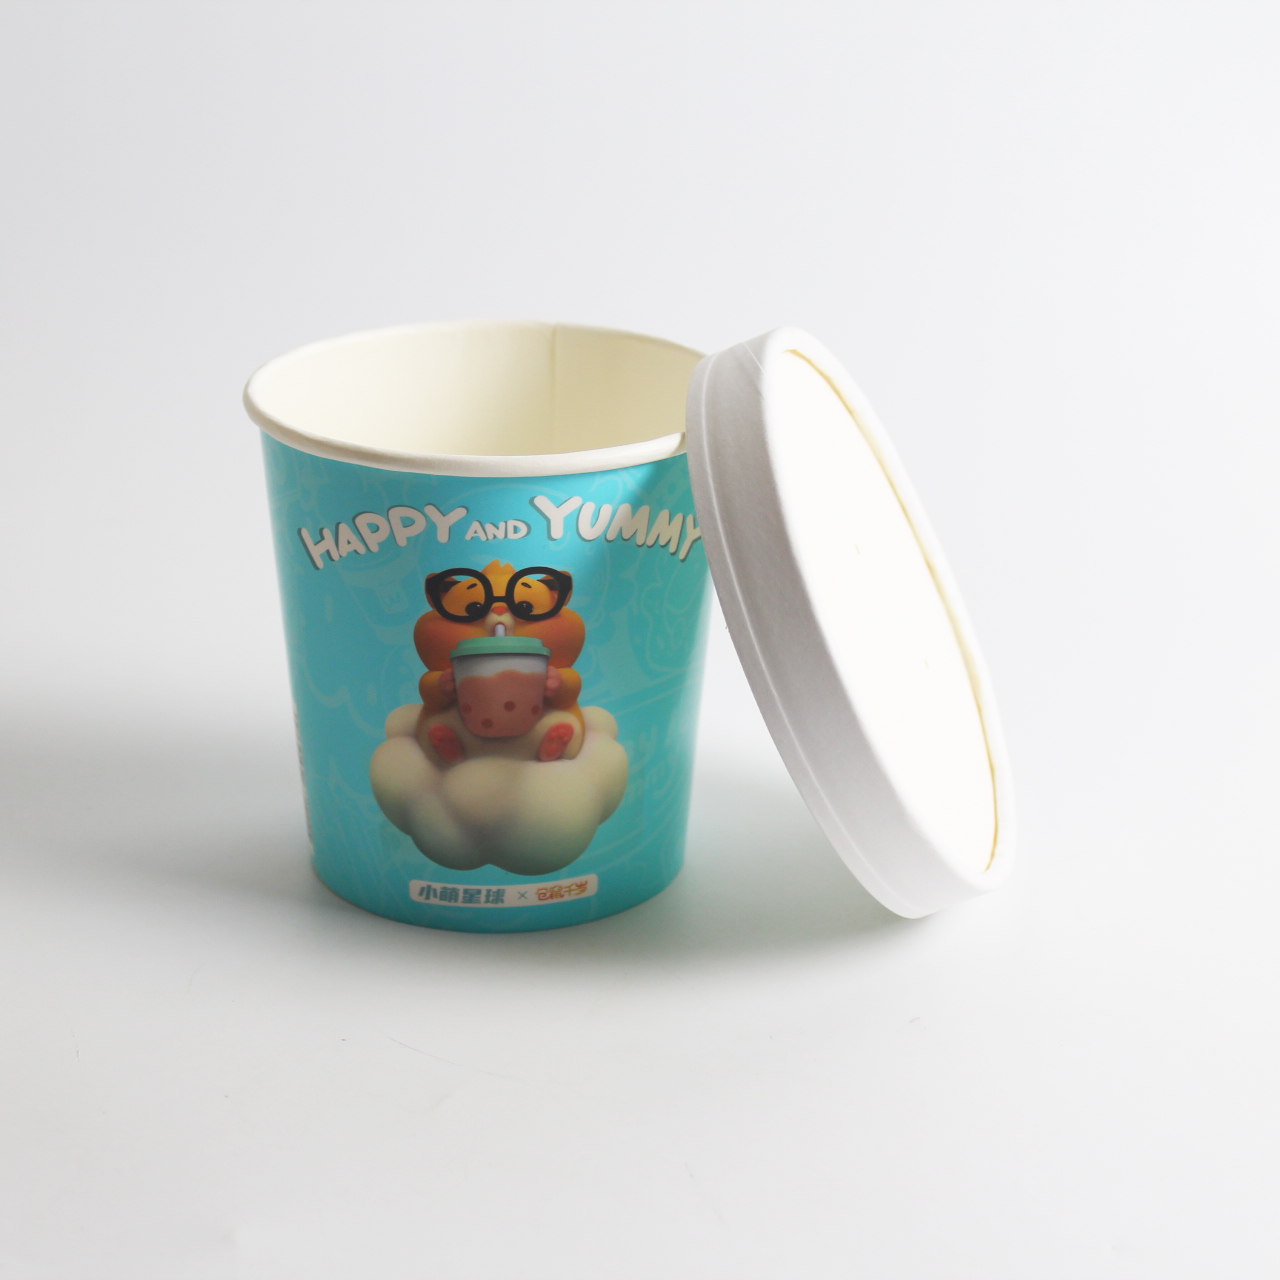 https://www.tuobopackaging.com/12oz-ice-cream-cups-custom-printed-cups-for-frozen-dessert-tuobo-product/